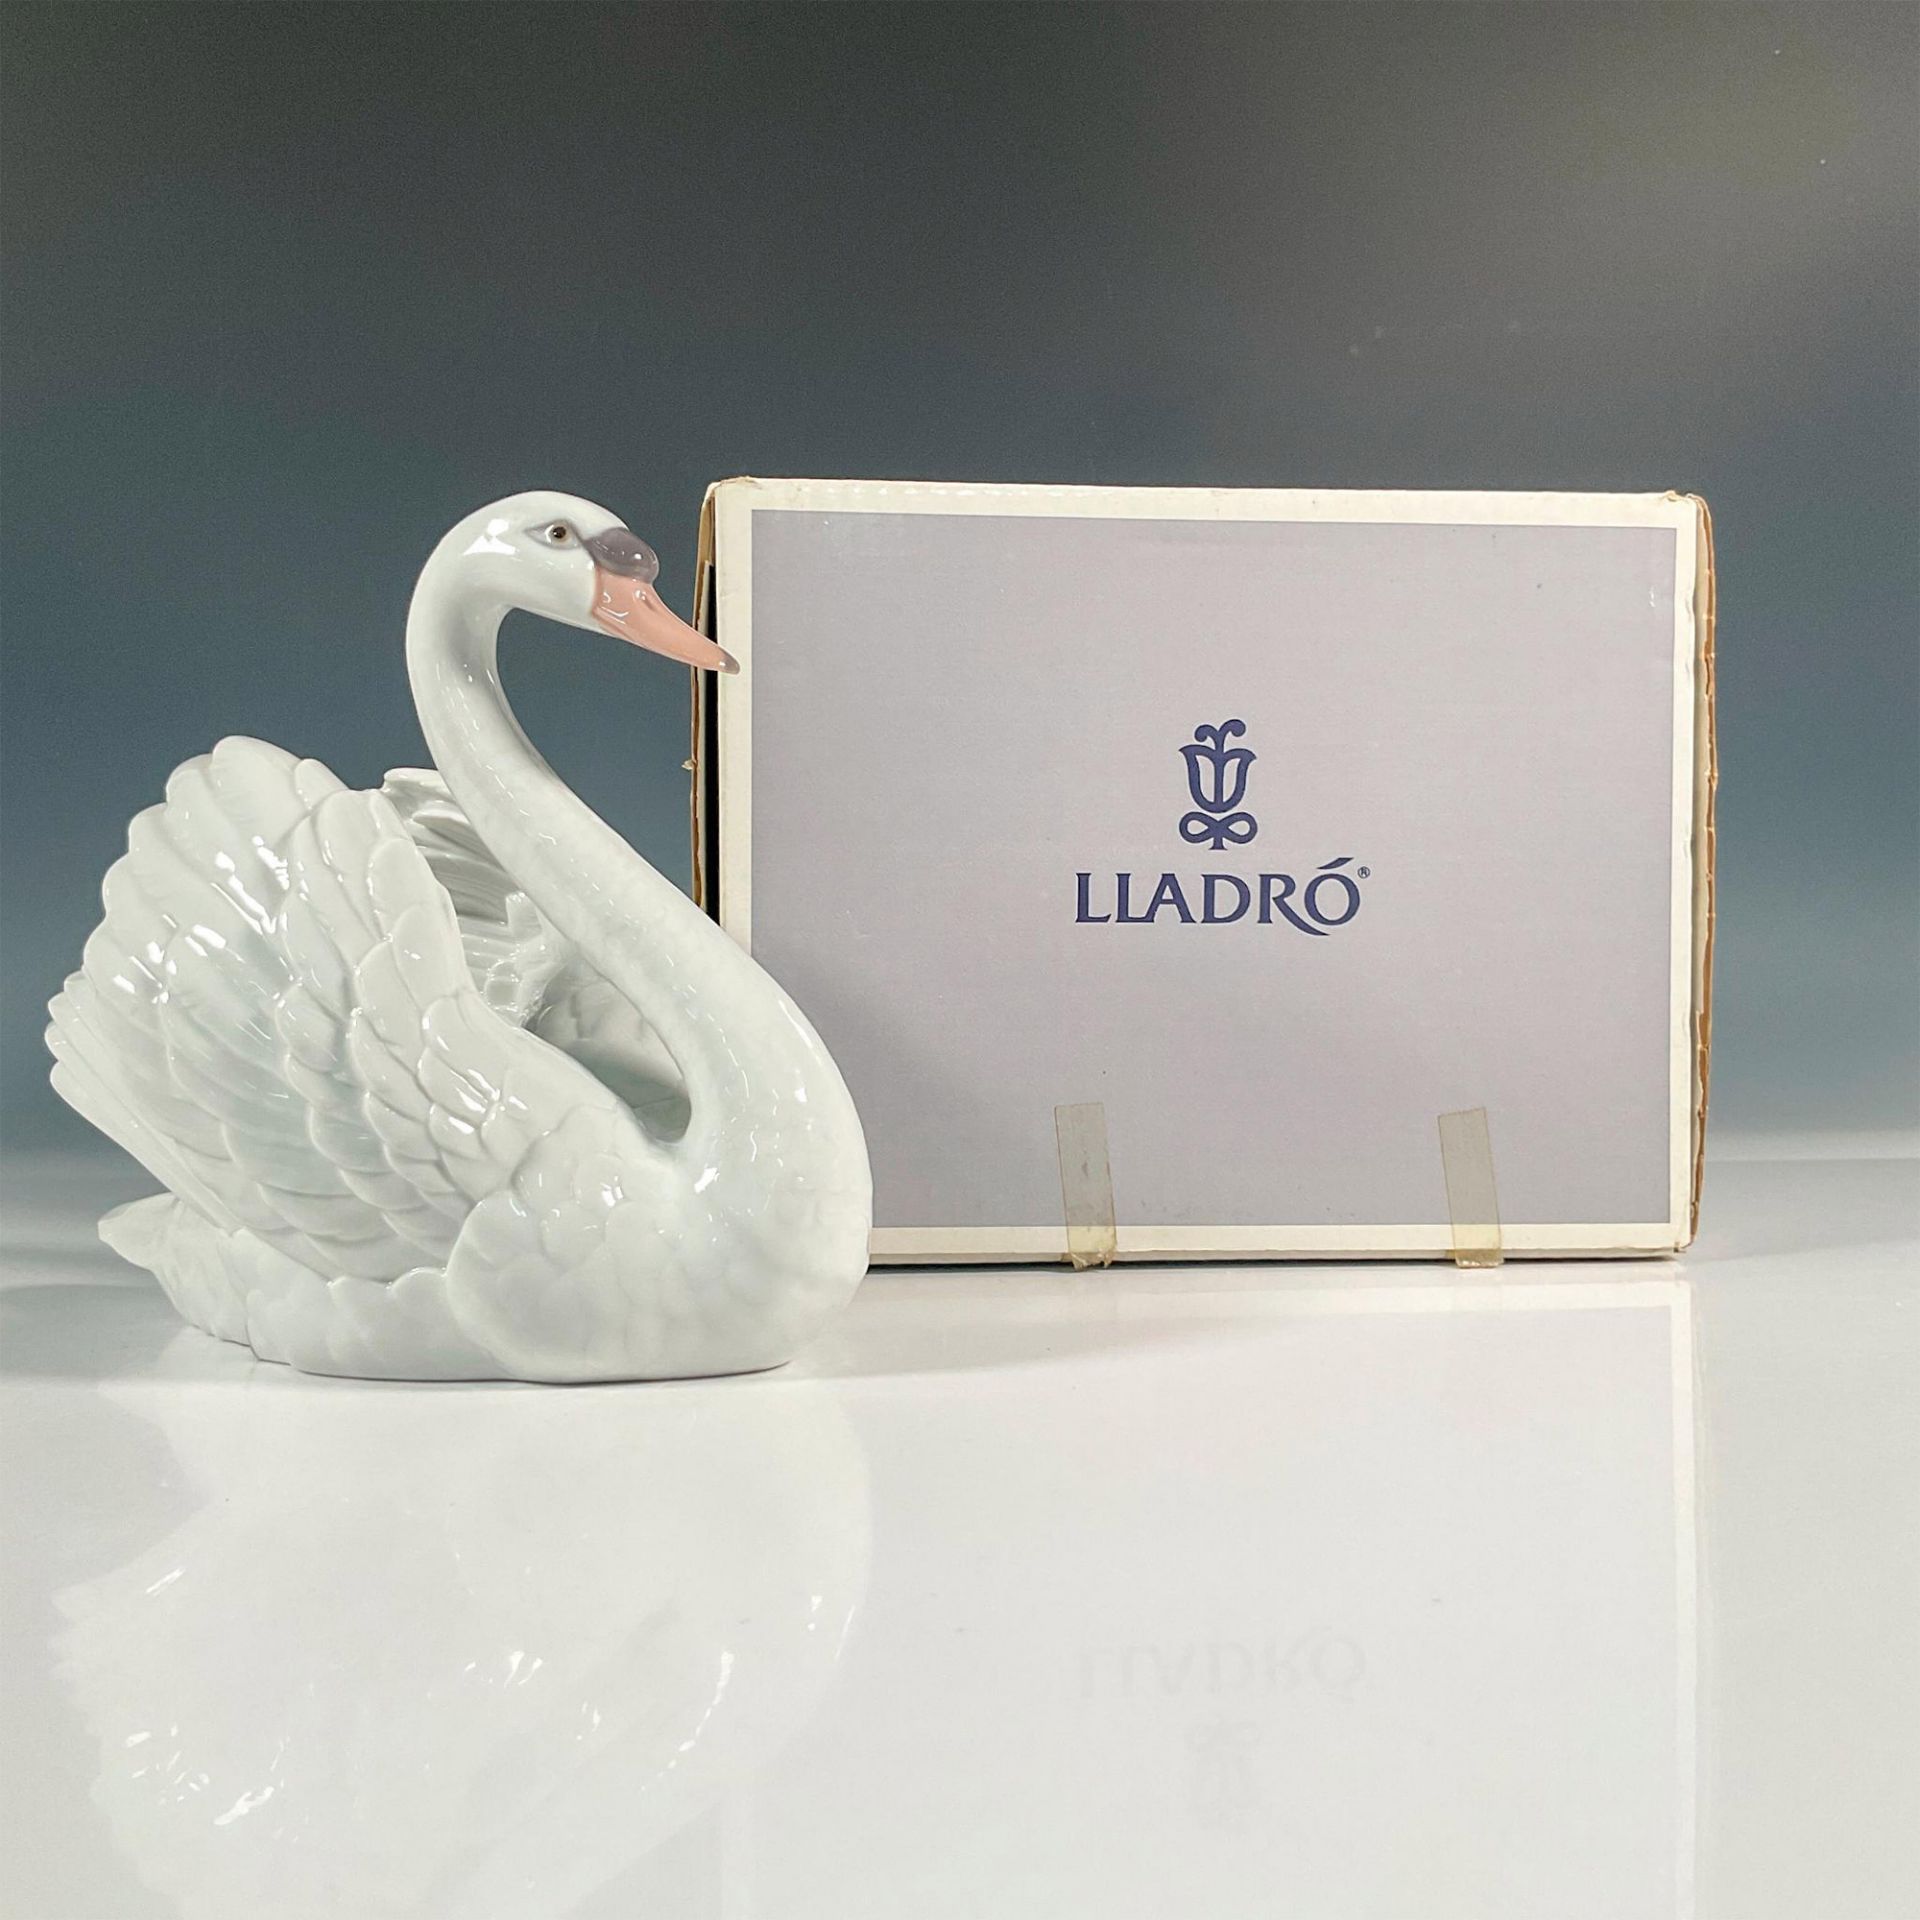 Swan With Wings Spread 1005231 - Lladro Porcelain Figurine - Image 6 of 6